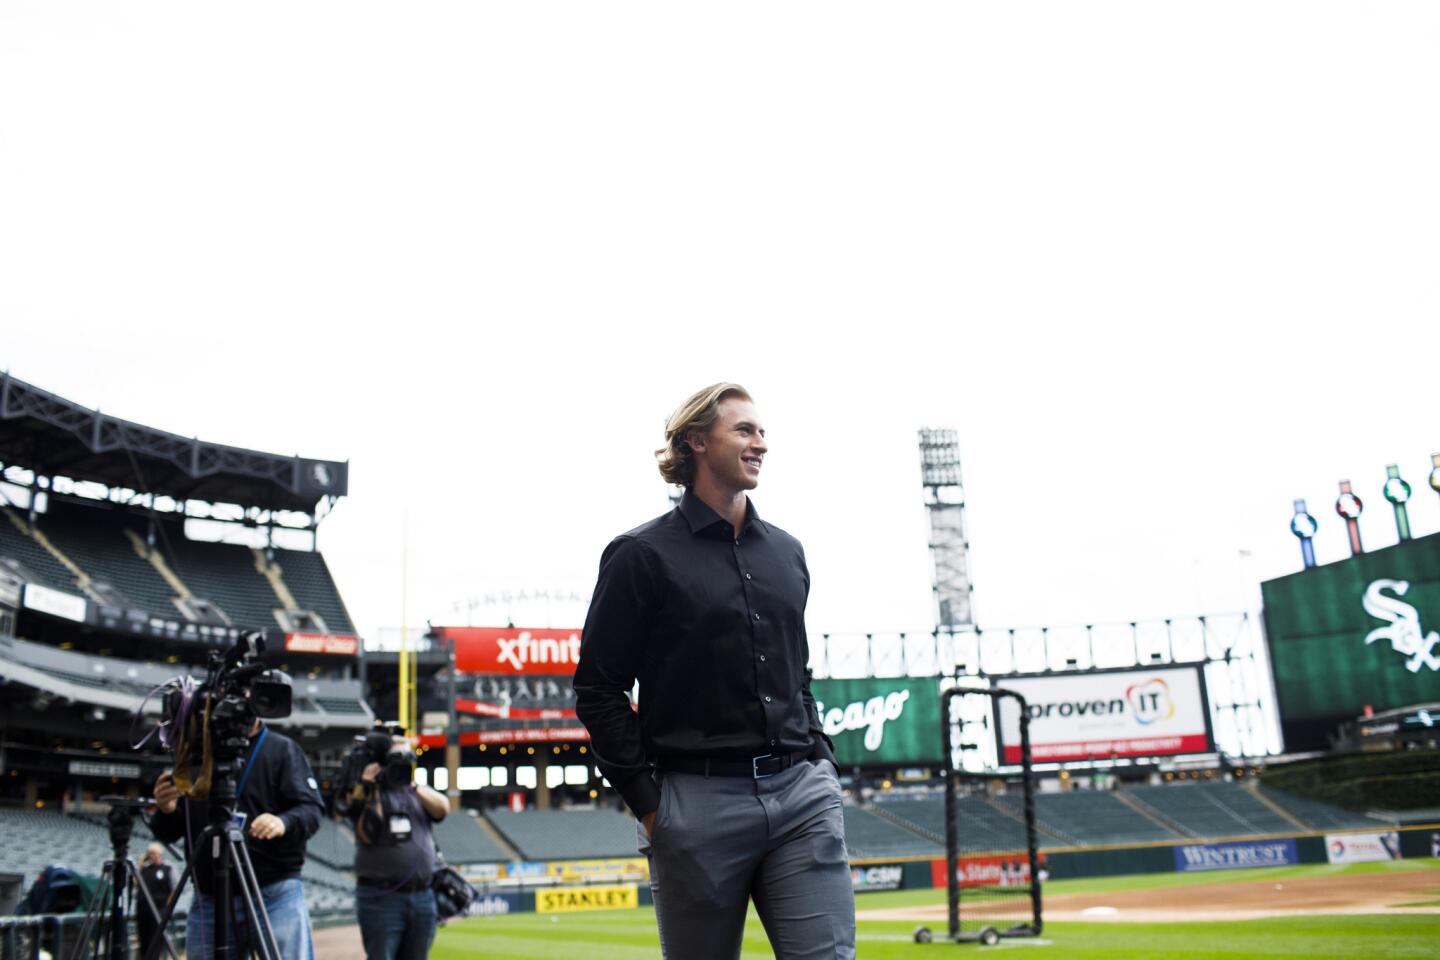 Michael Kopech walks on the field at Guaranteed Rate Field before a White Sox game on Sept. 6, 2017.